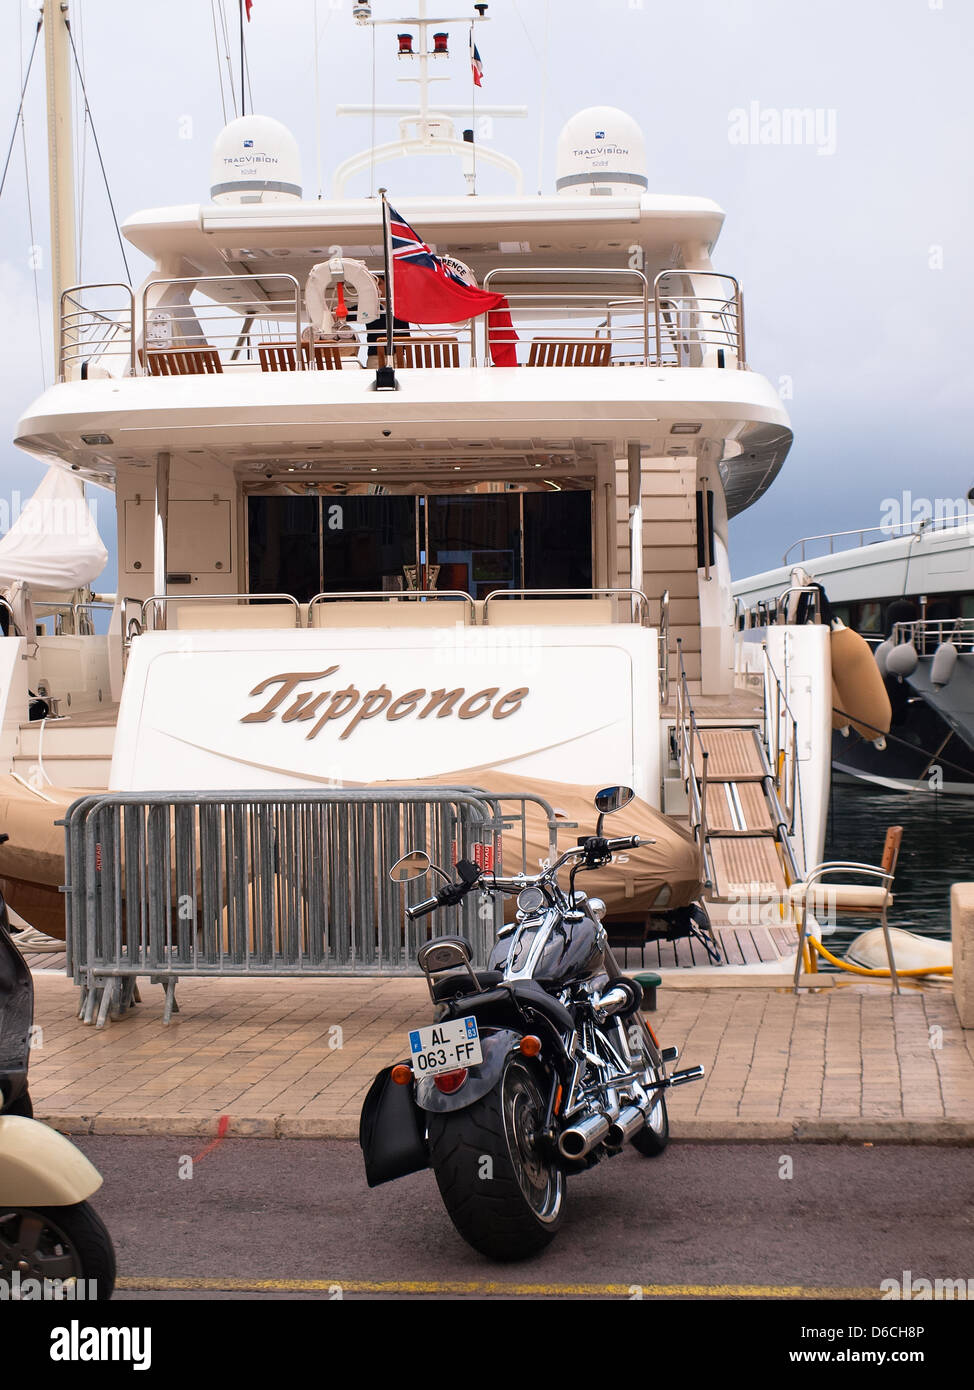 Boat and motorcycle in Saint Tropez, France. Stock Photo